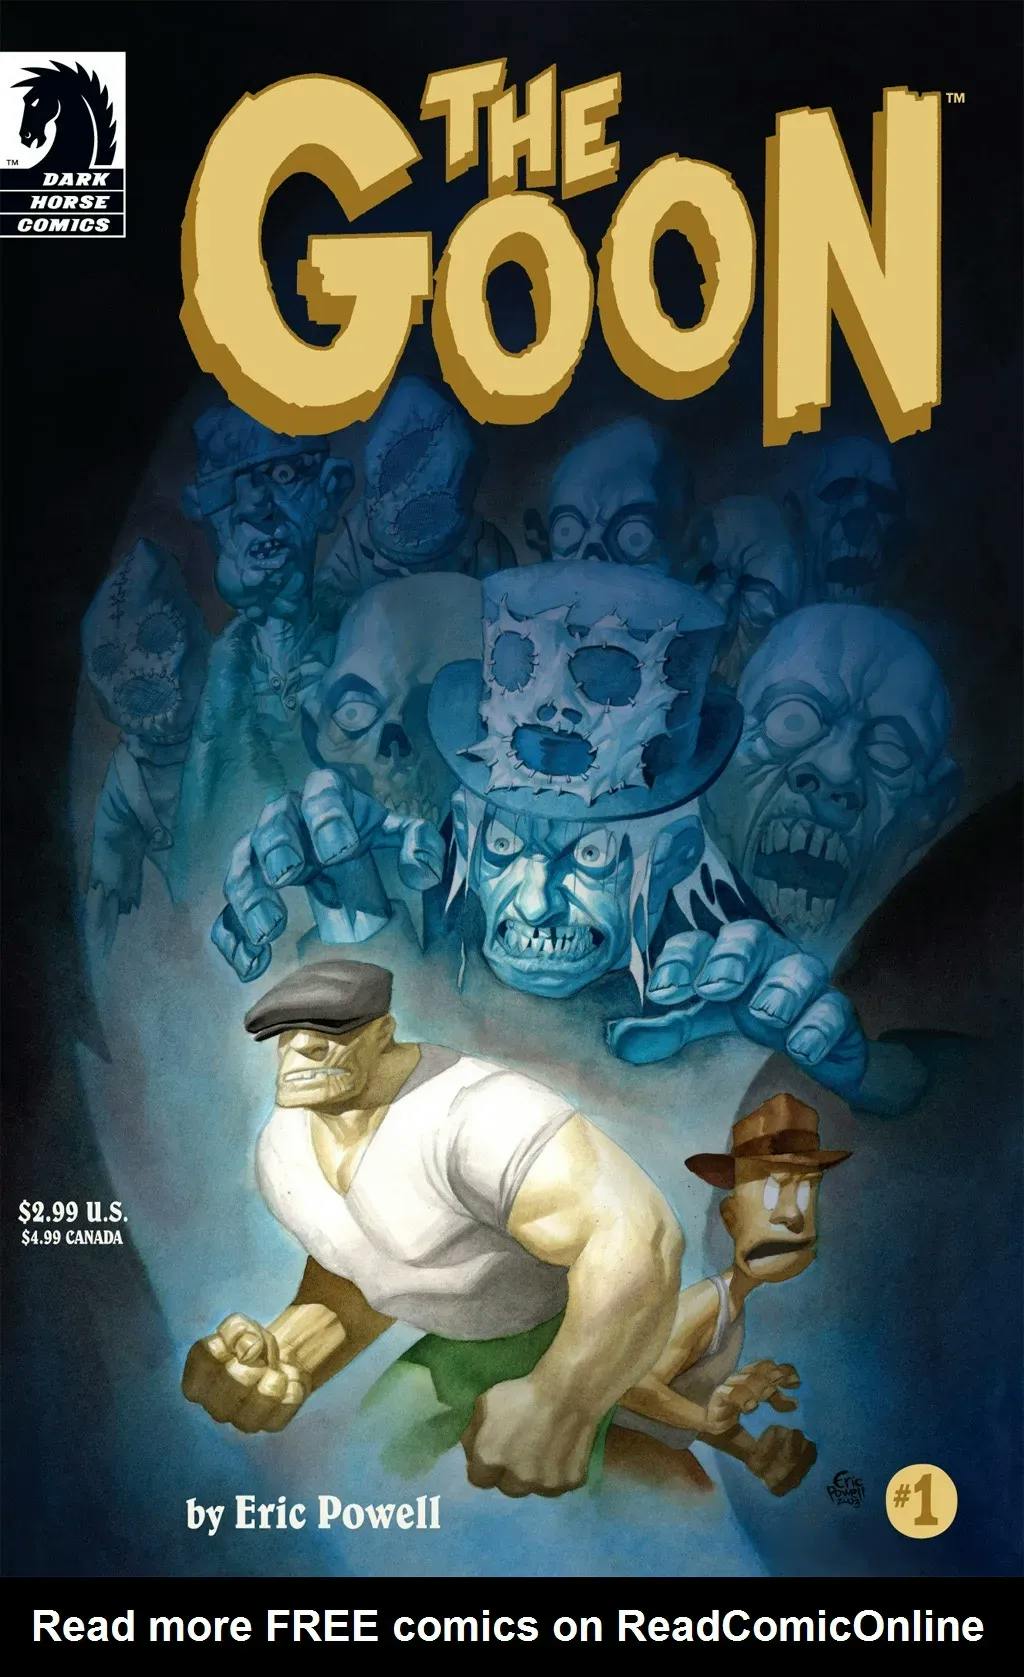 The Goon by Eric Powell